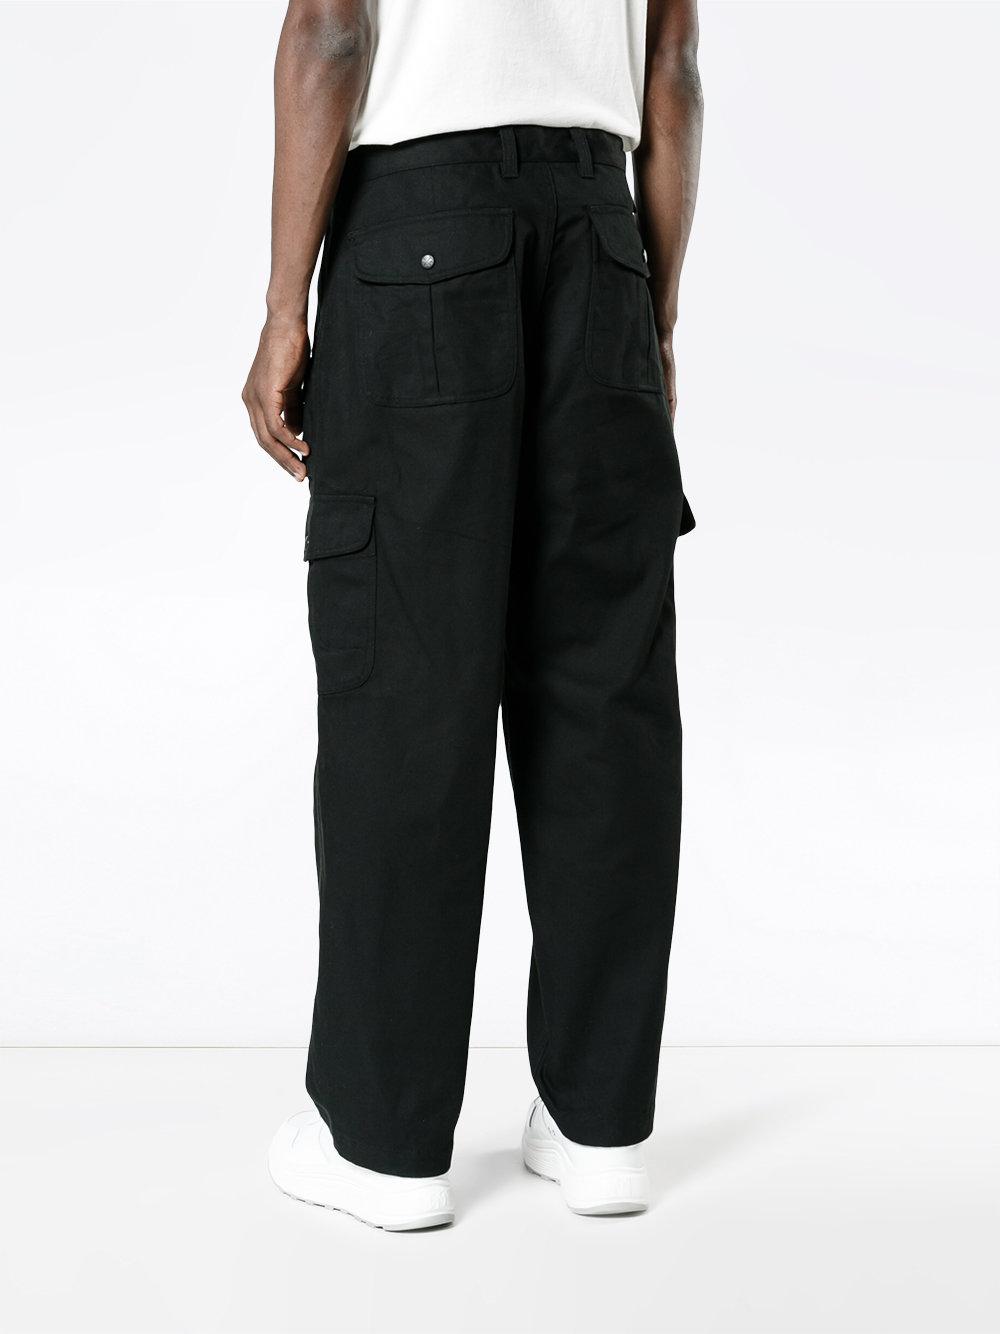 White Mountaineering Cotton Hunting Cargo Pants in Black for Men - Lyst